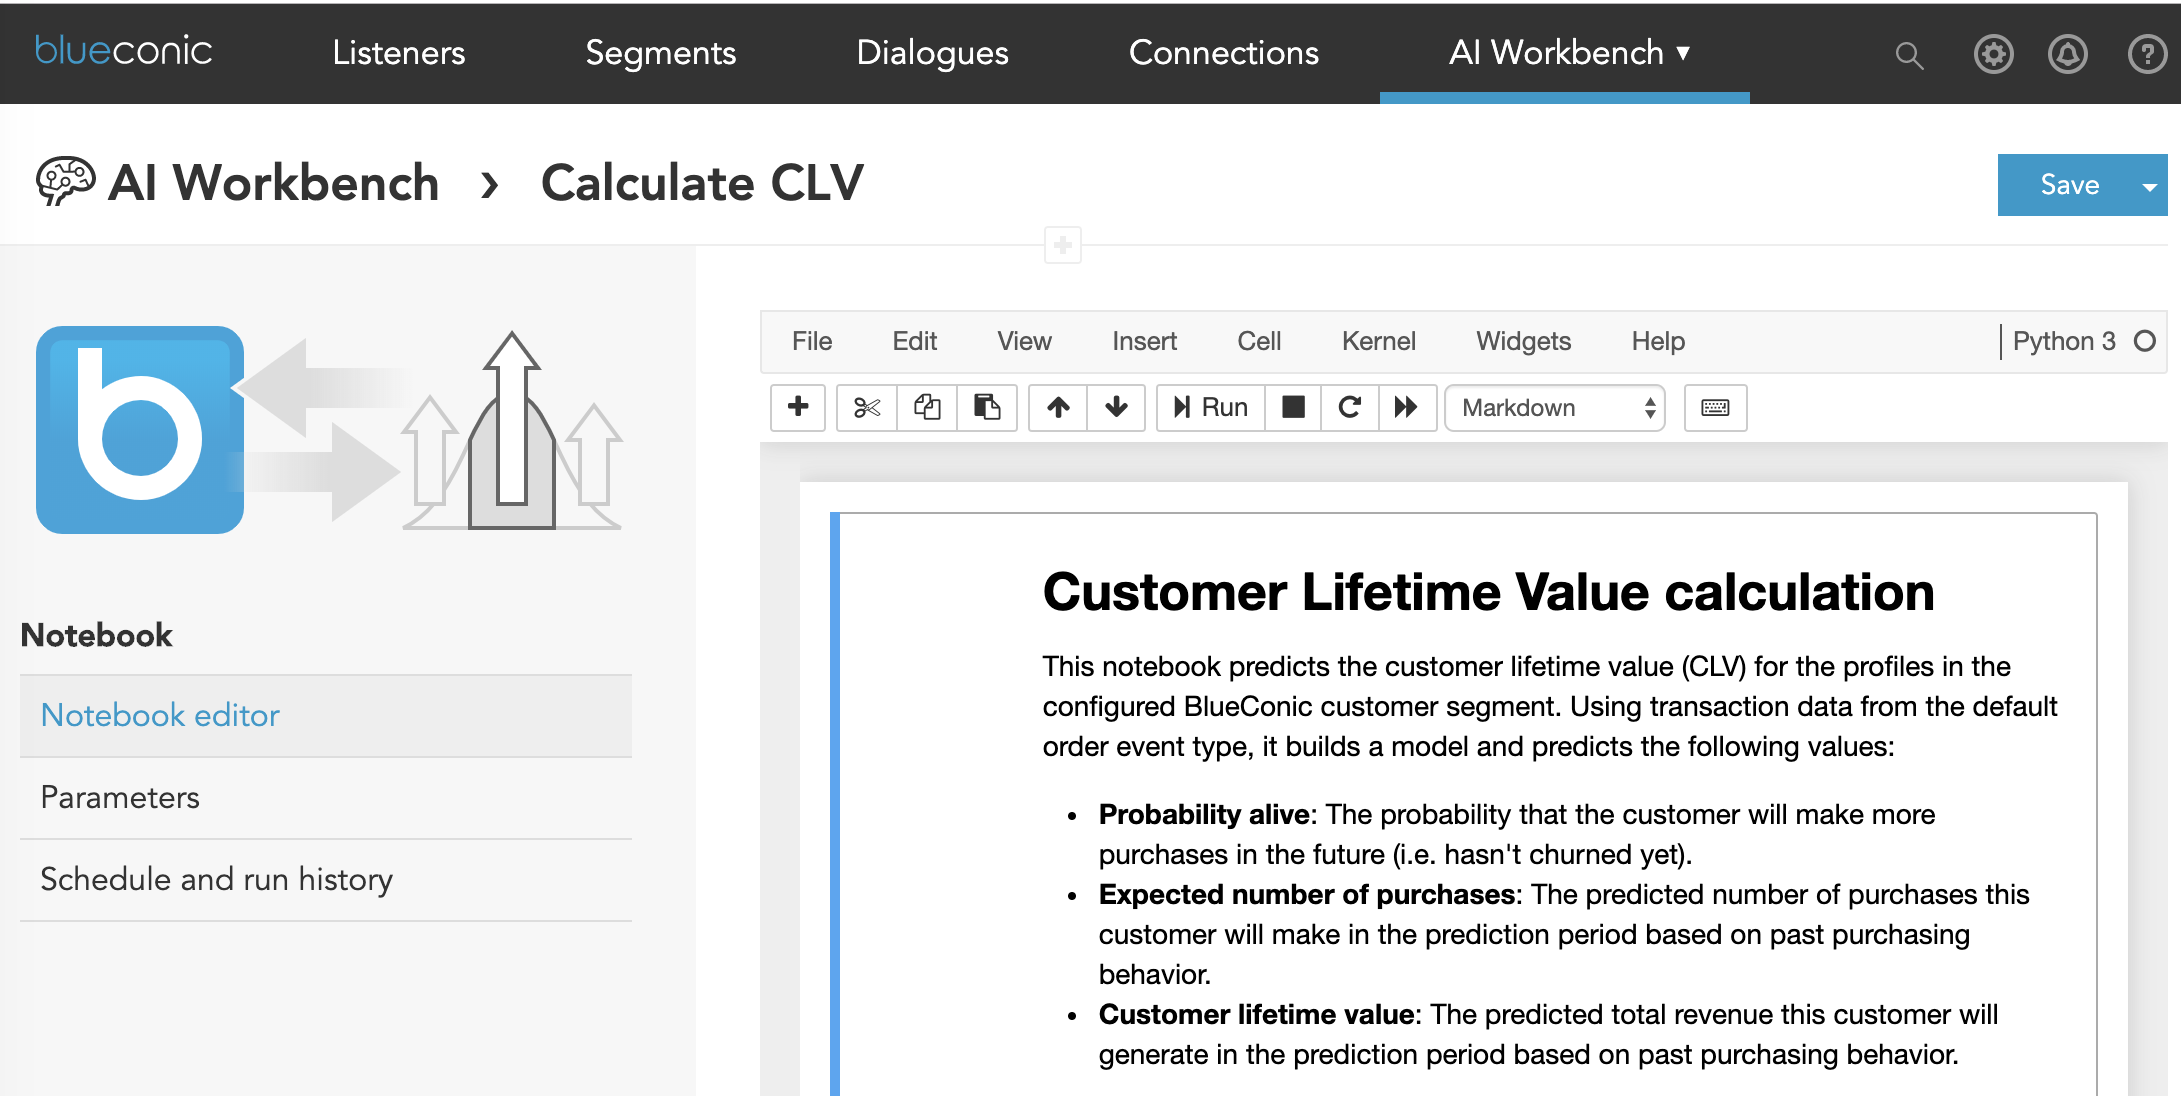 How to calculate CLV using AI models, AI marketing, machine learning, and predictive analytics for marketing with customer data and customer segments in the BlueConic CDP